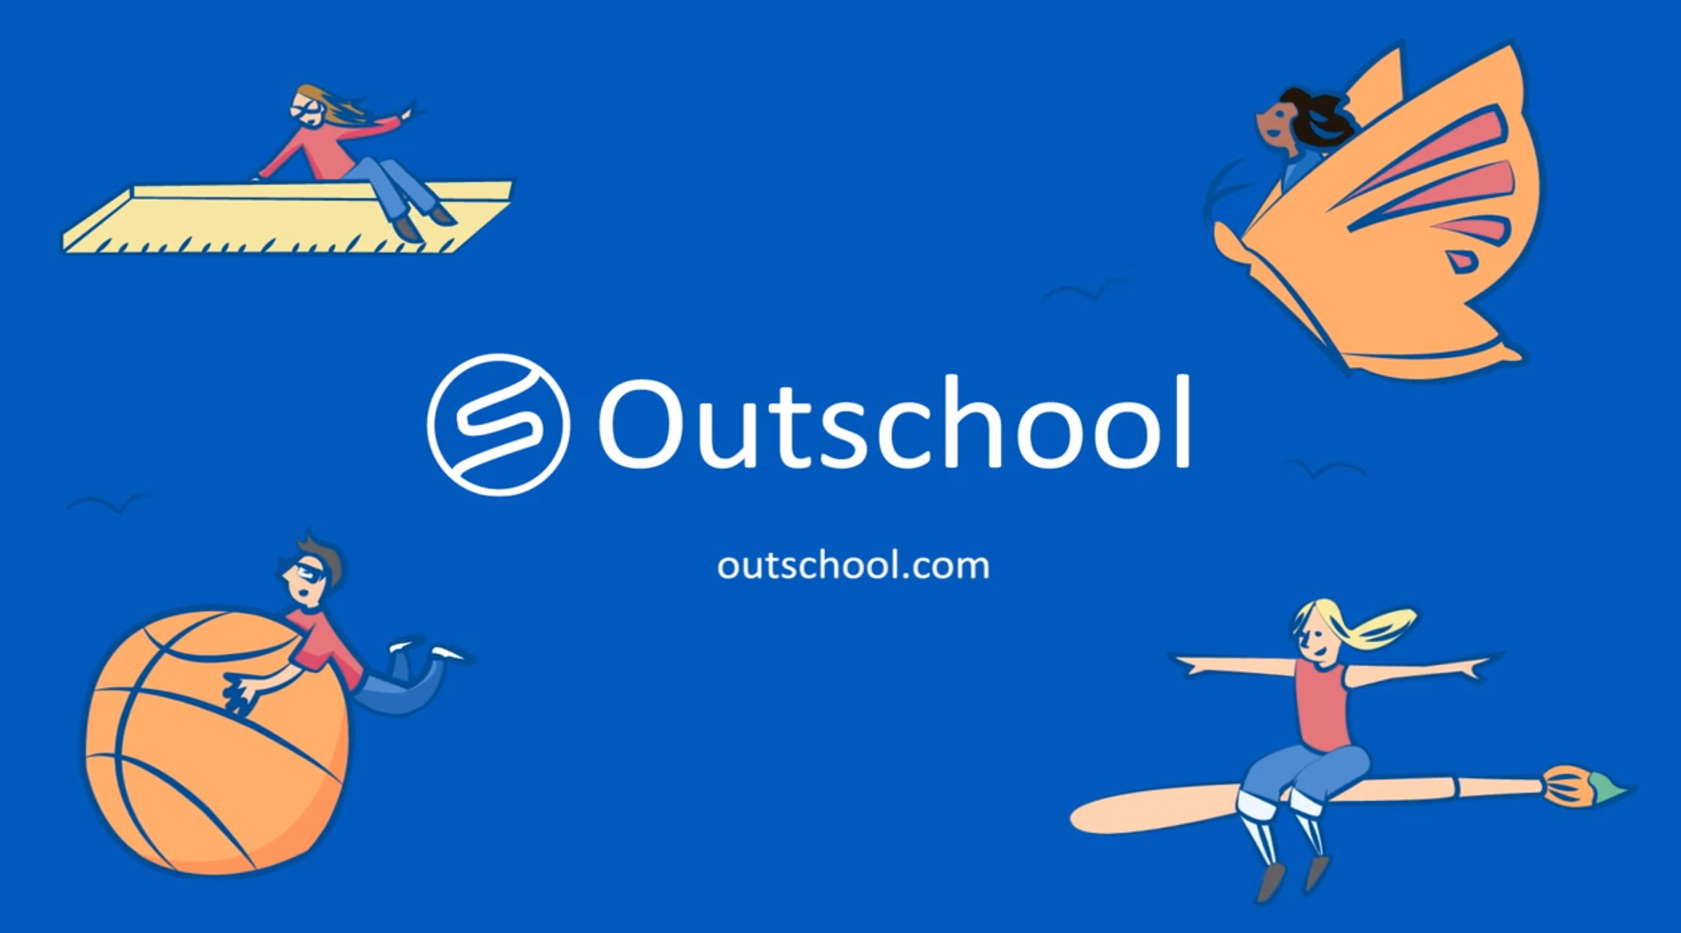 Outschool Overall